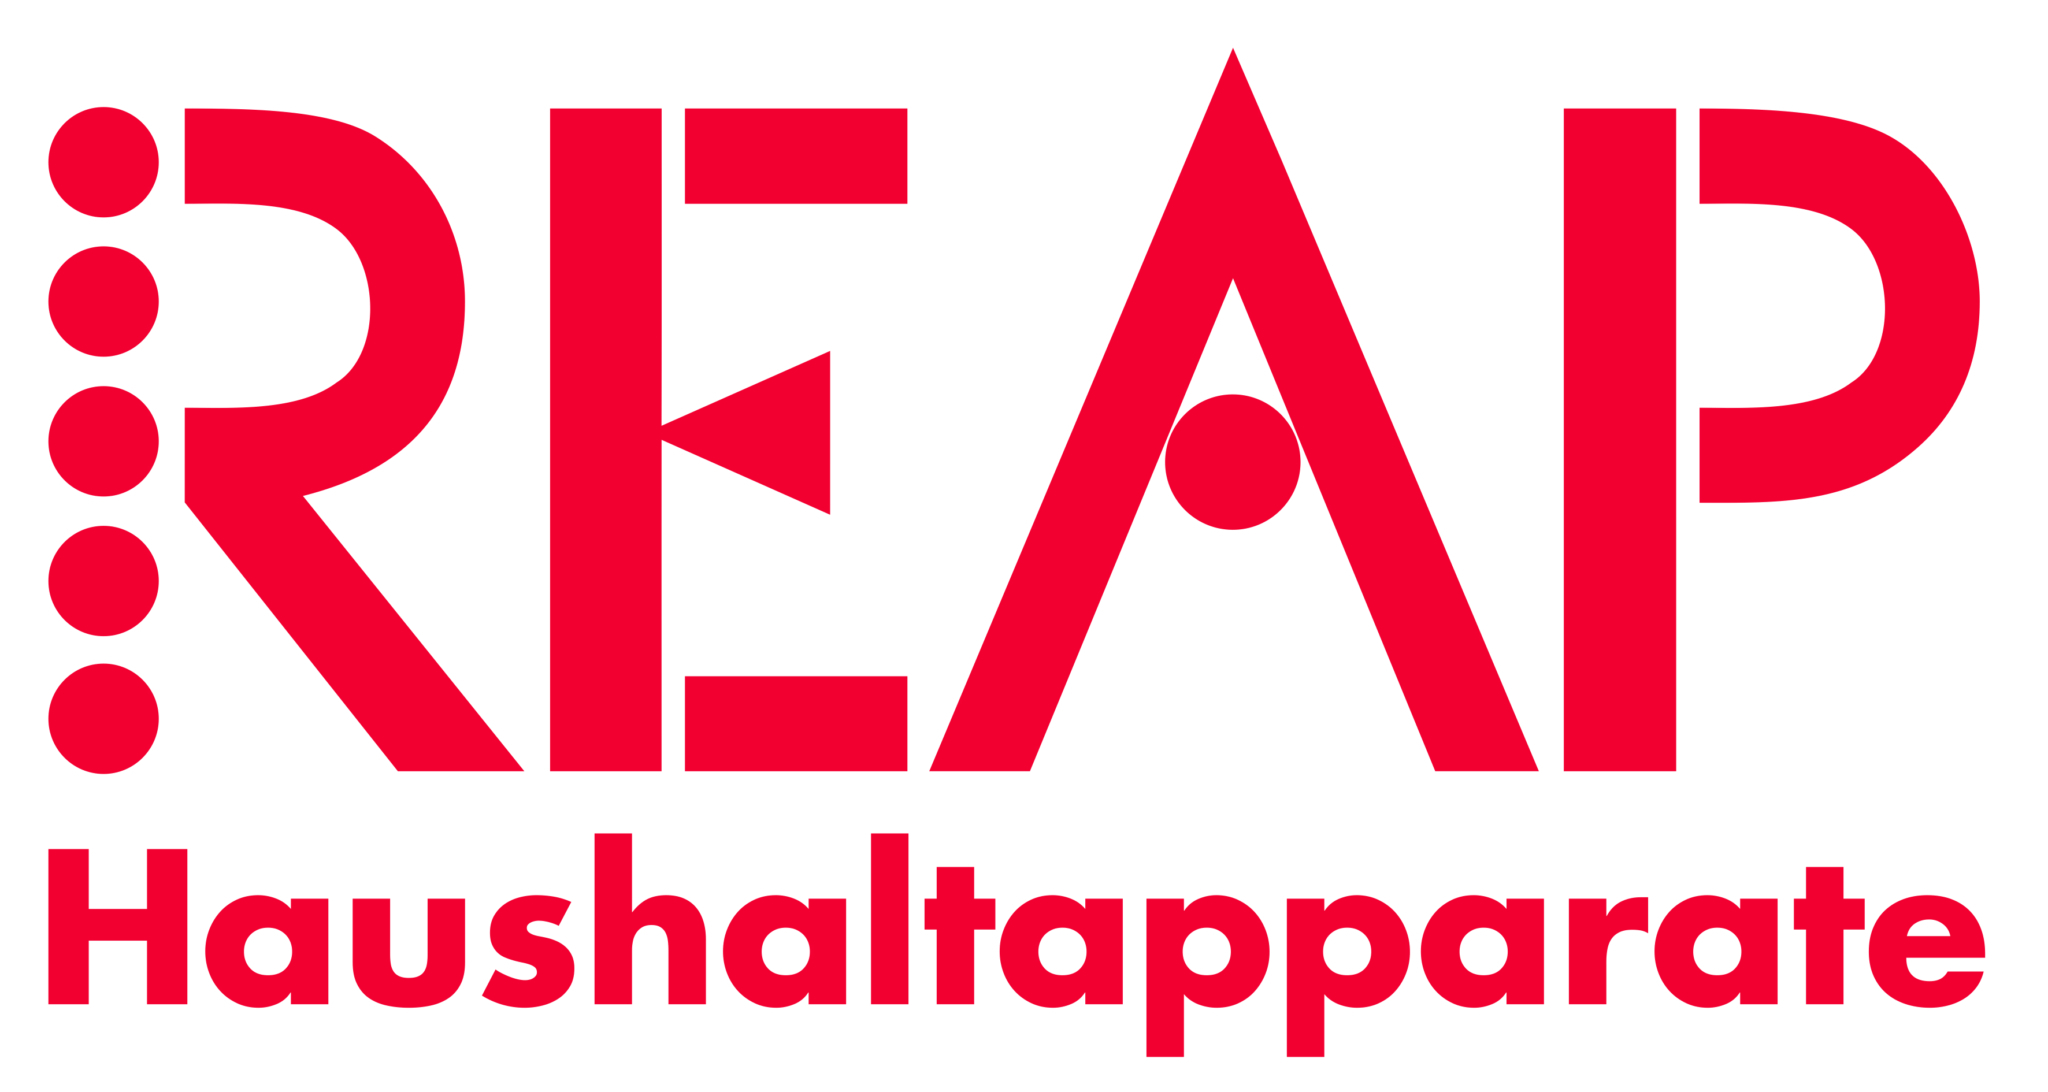 REAP AG Haushaltapparate